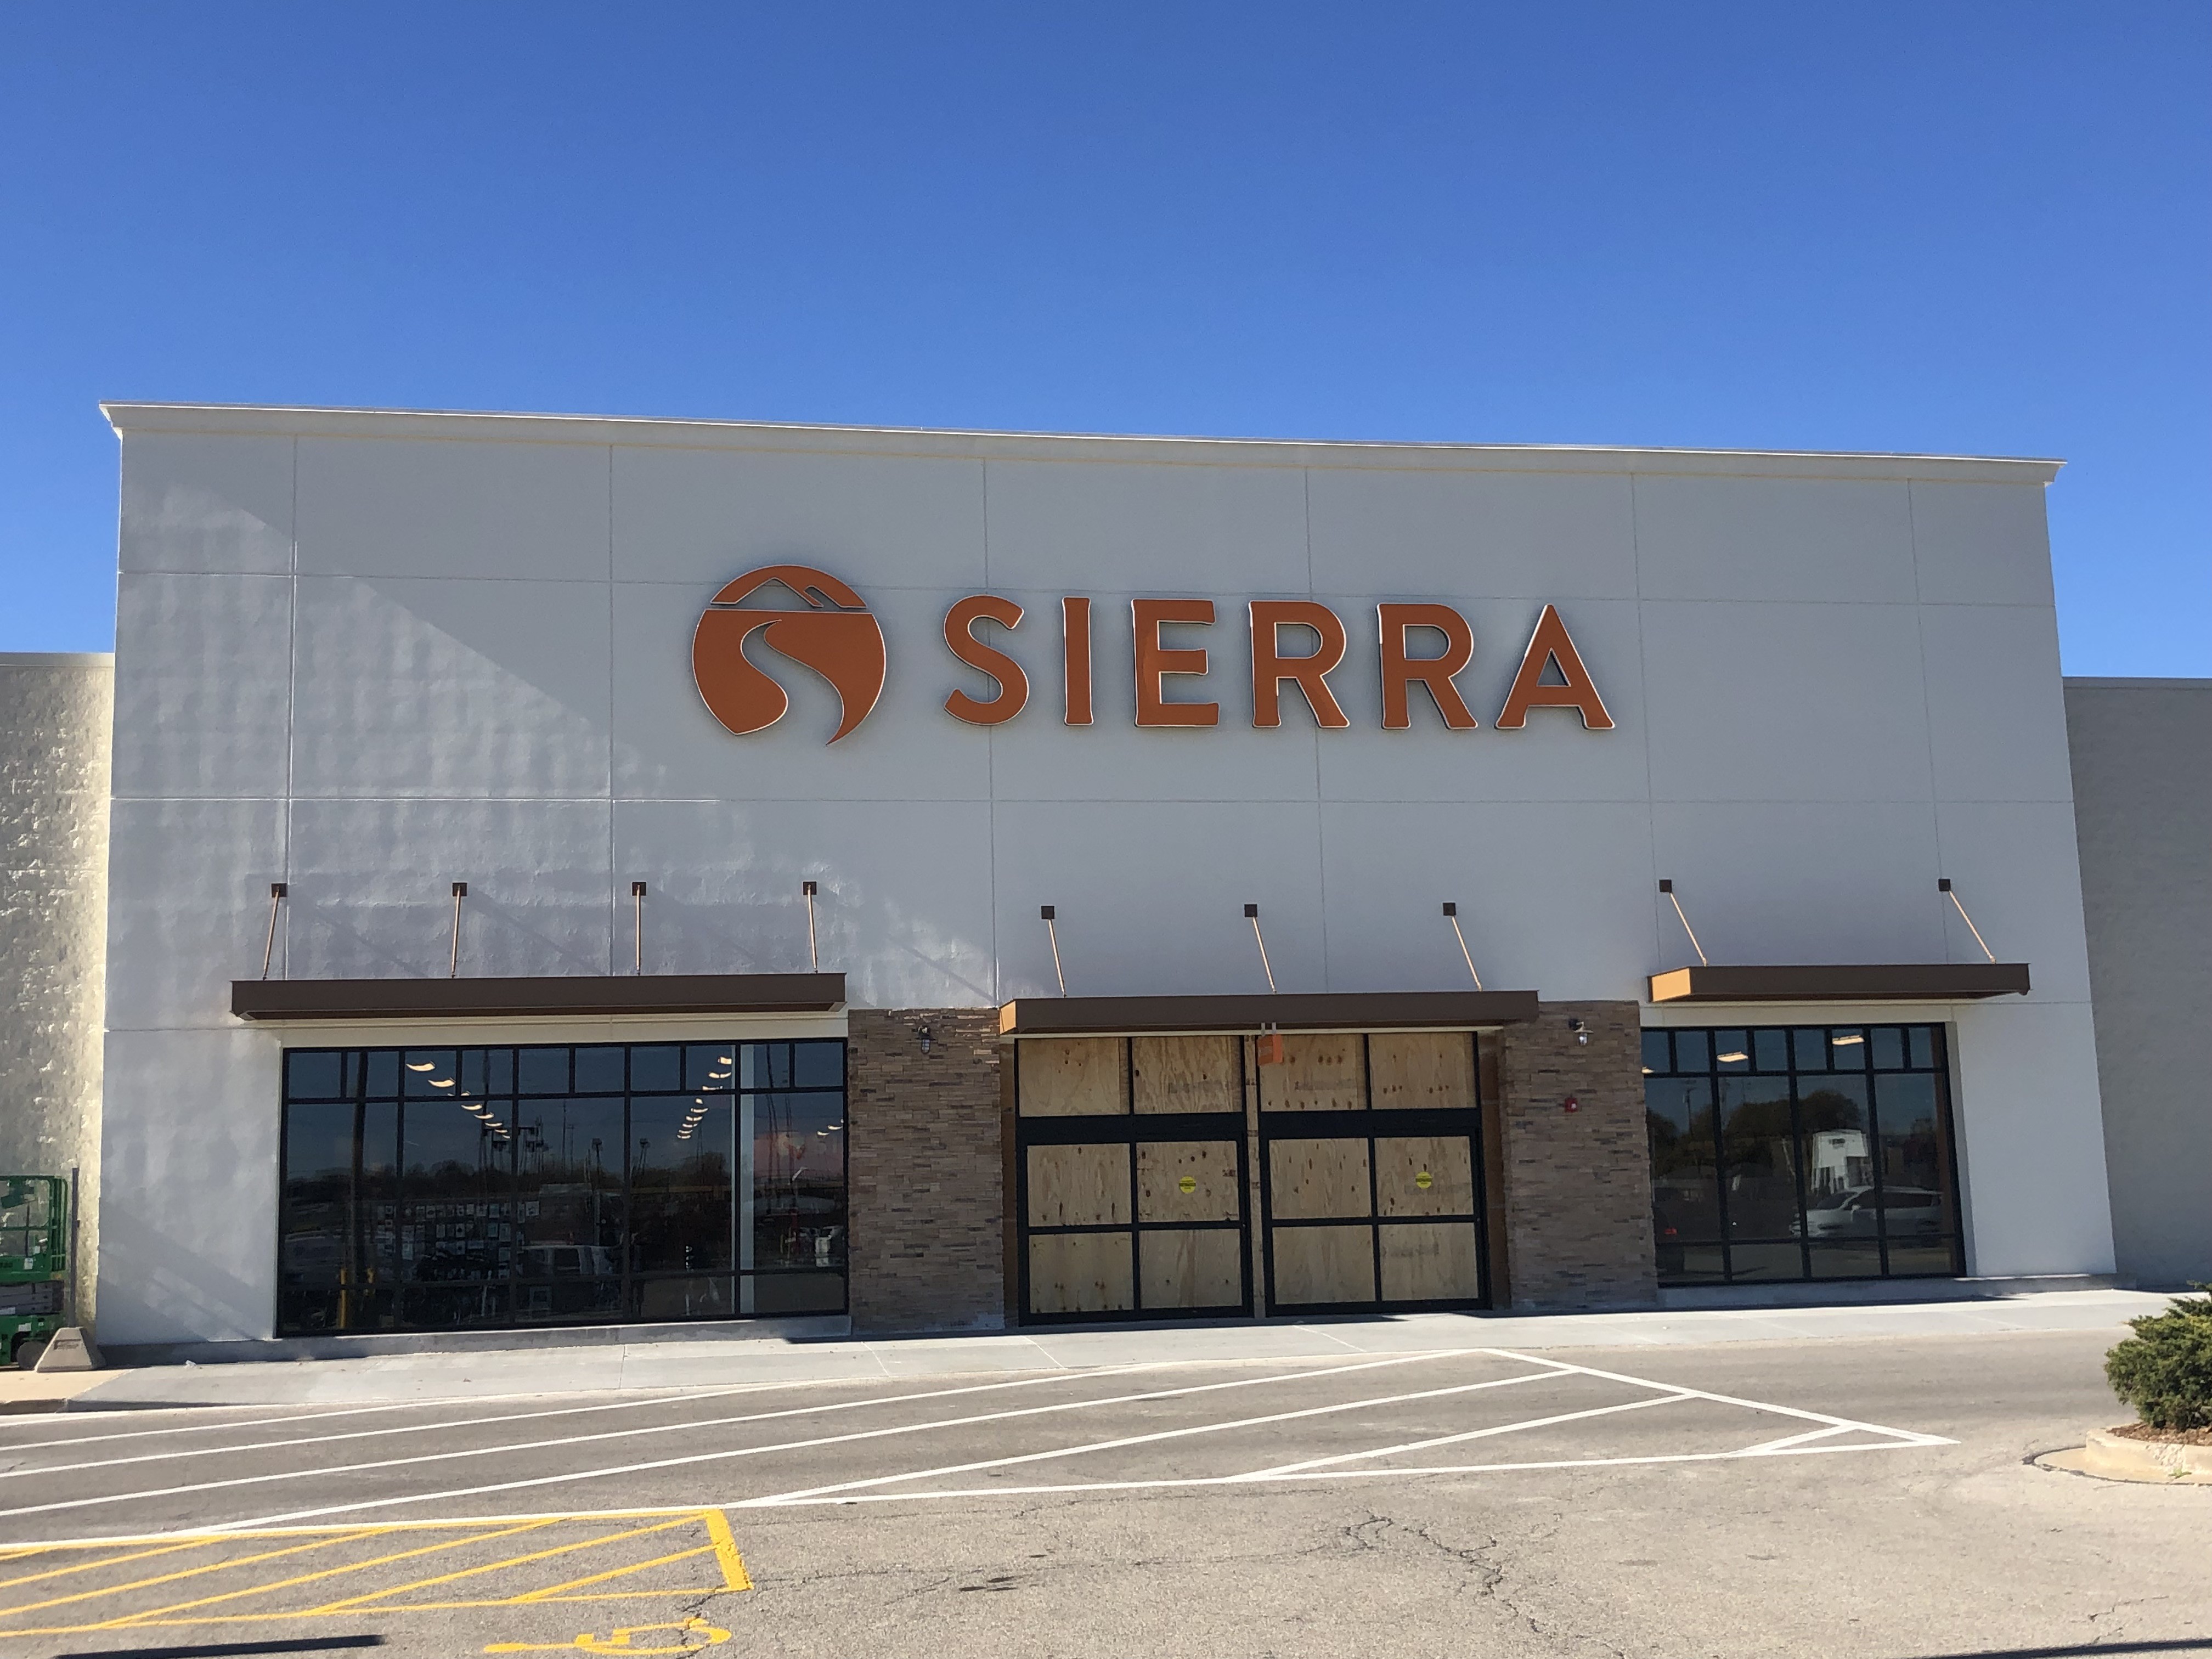 Academy Sports + Outdoors and Sierra both opening Springfield stores, Comings & Goings